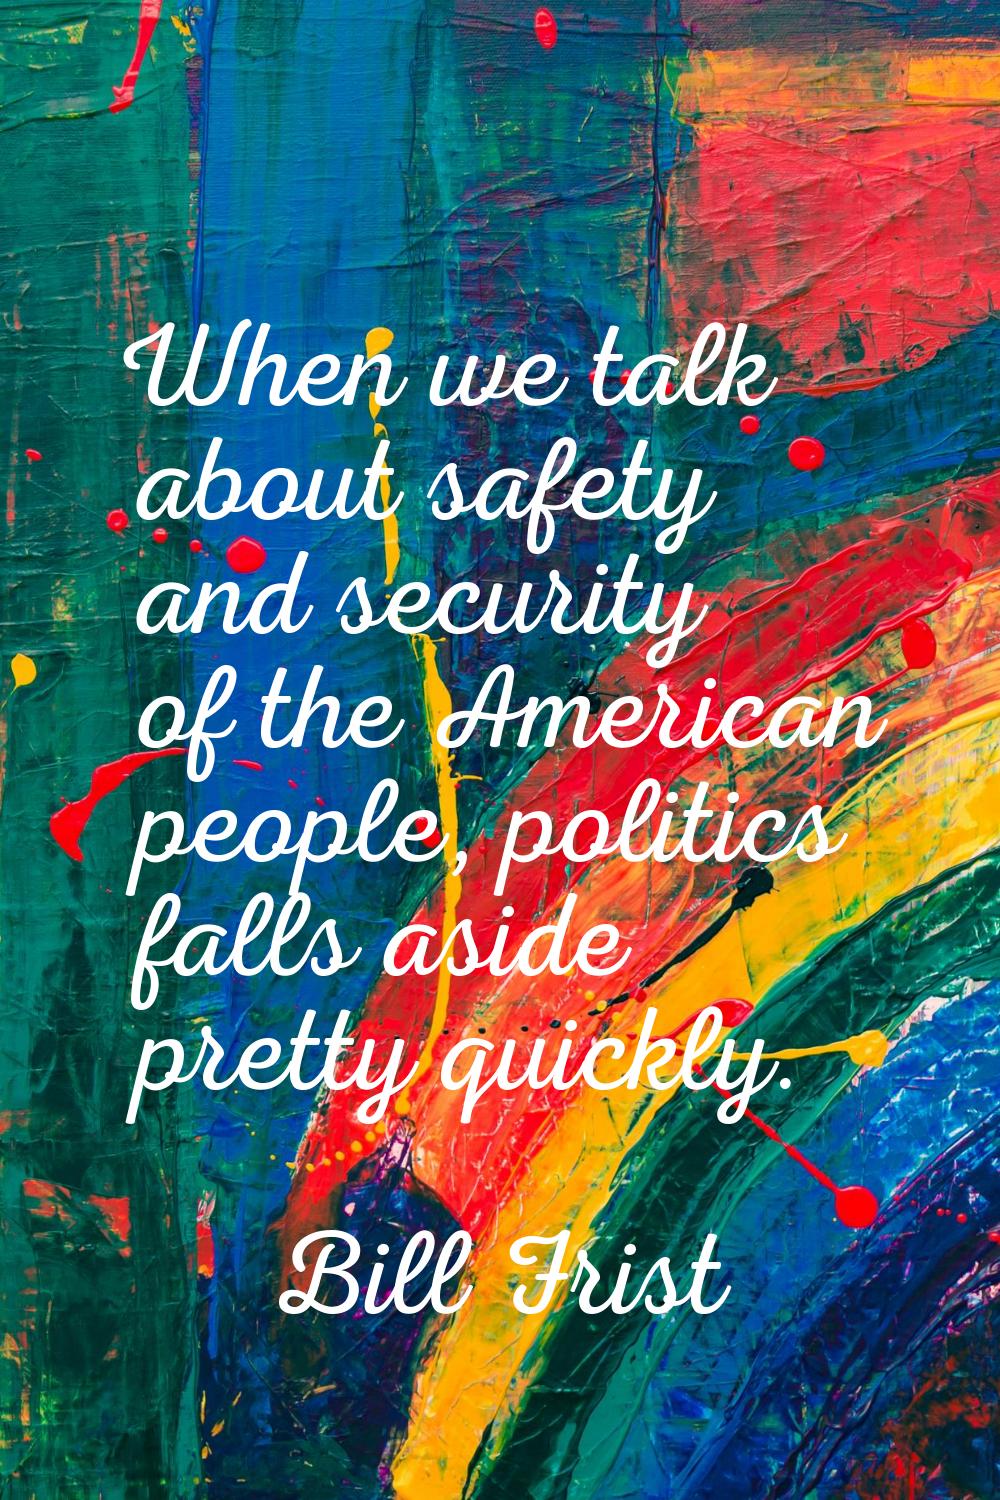 When we talk about safety and security of the American people, politics falls aside pretty quickly.